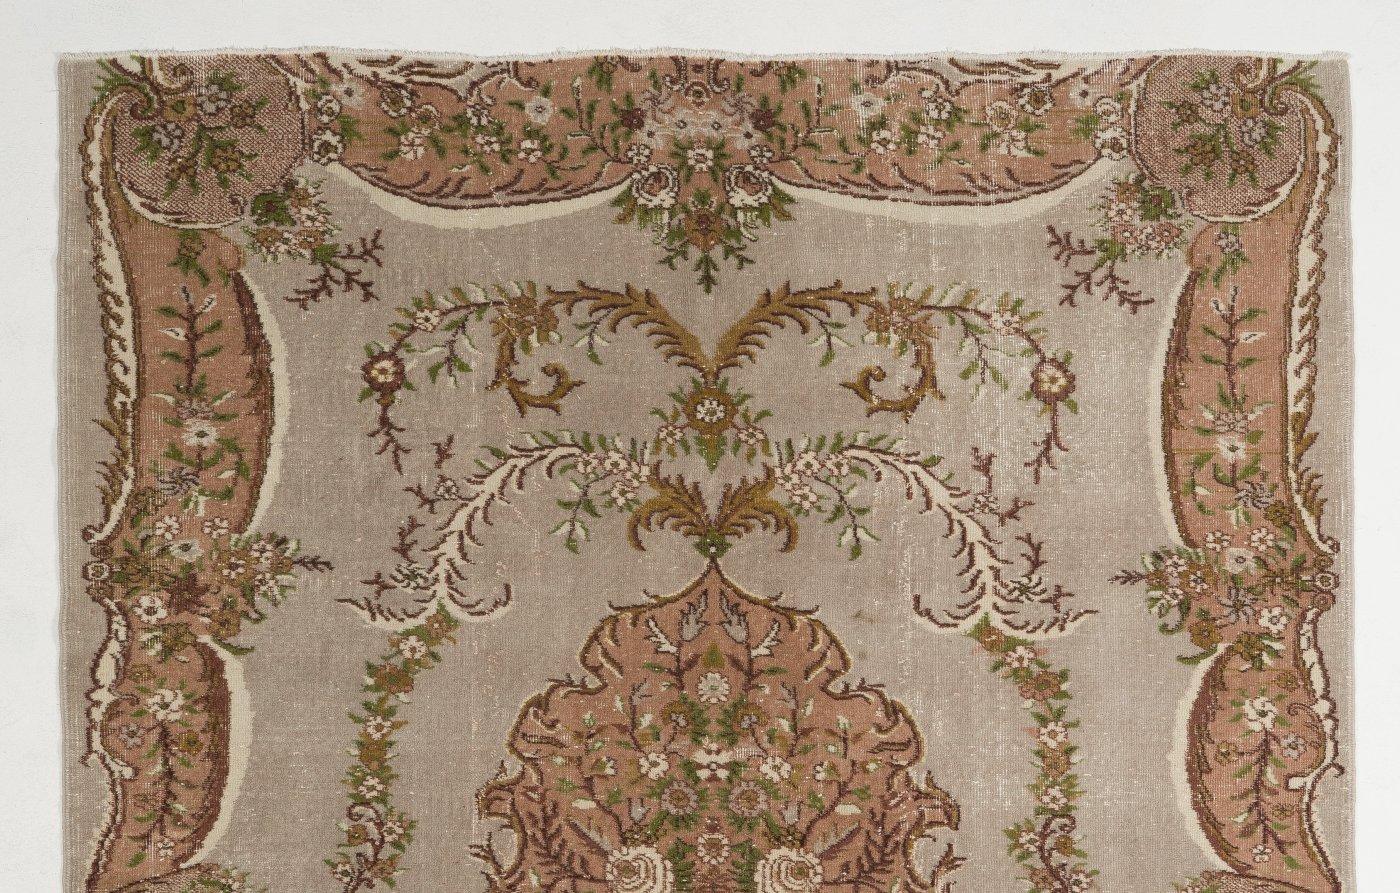 Vintage hand-knotted Turkish rug with low wool pile on cotton foundation with a French-Aubusson inspired design of floral bouquets and wreaths in faded rose and light taupe gray. The rug is in very good condition, sturdy, professionally cleaned and